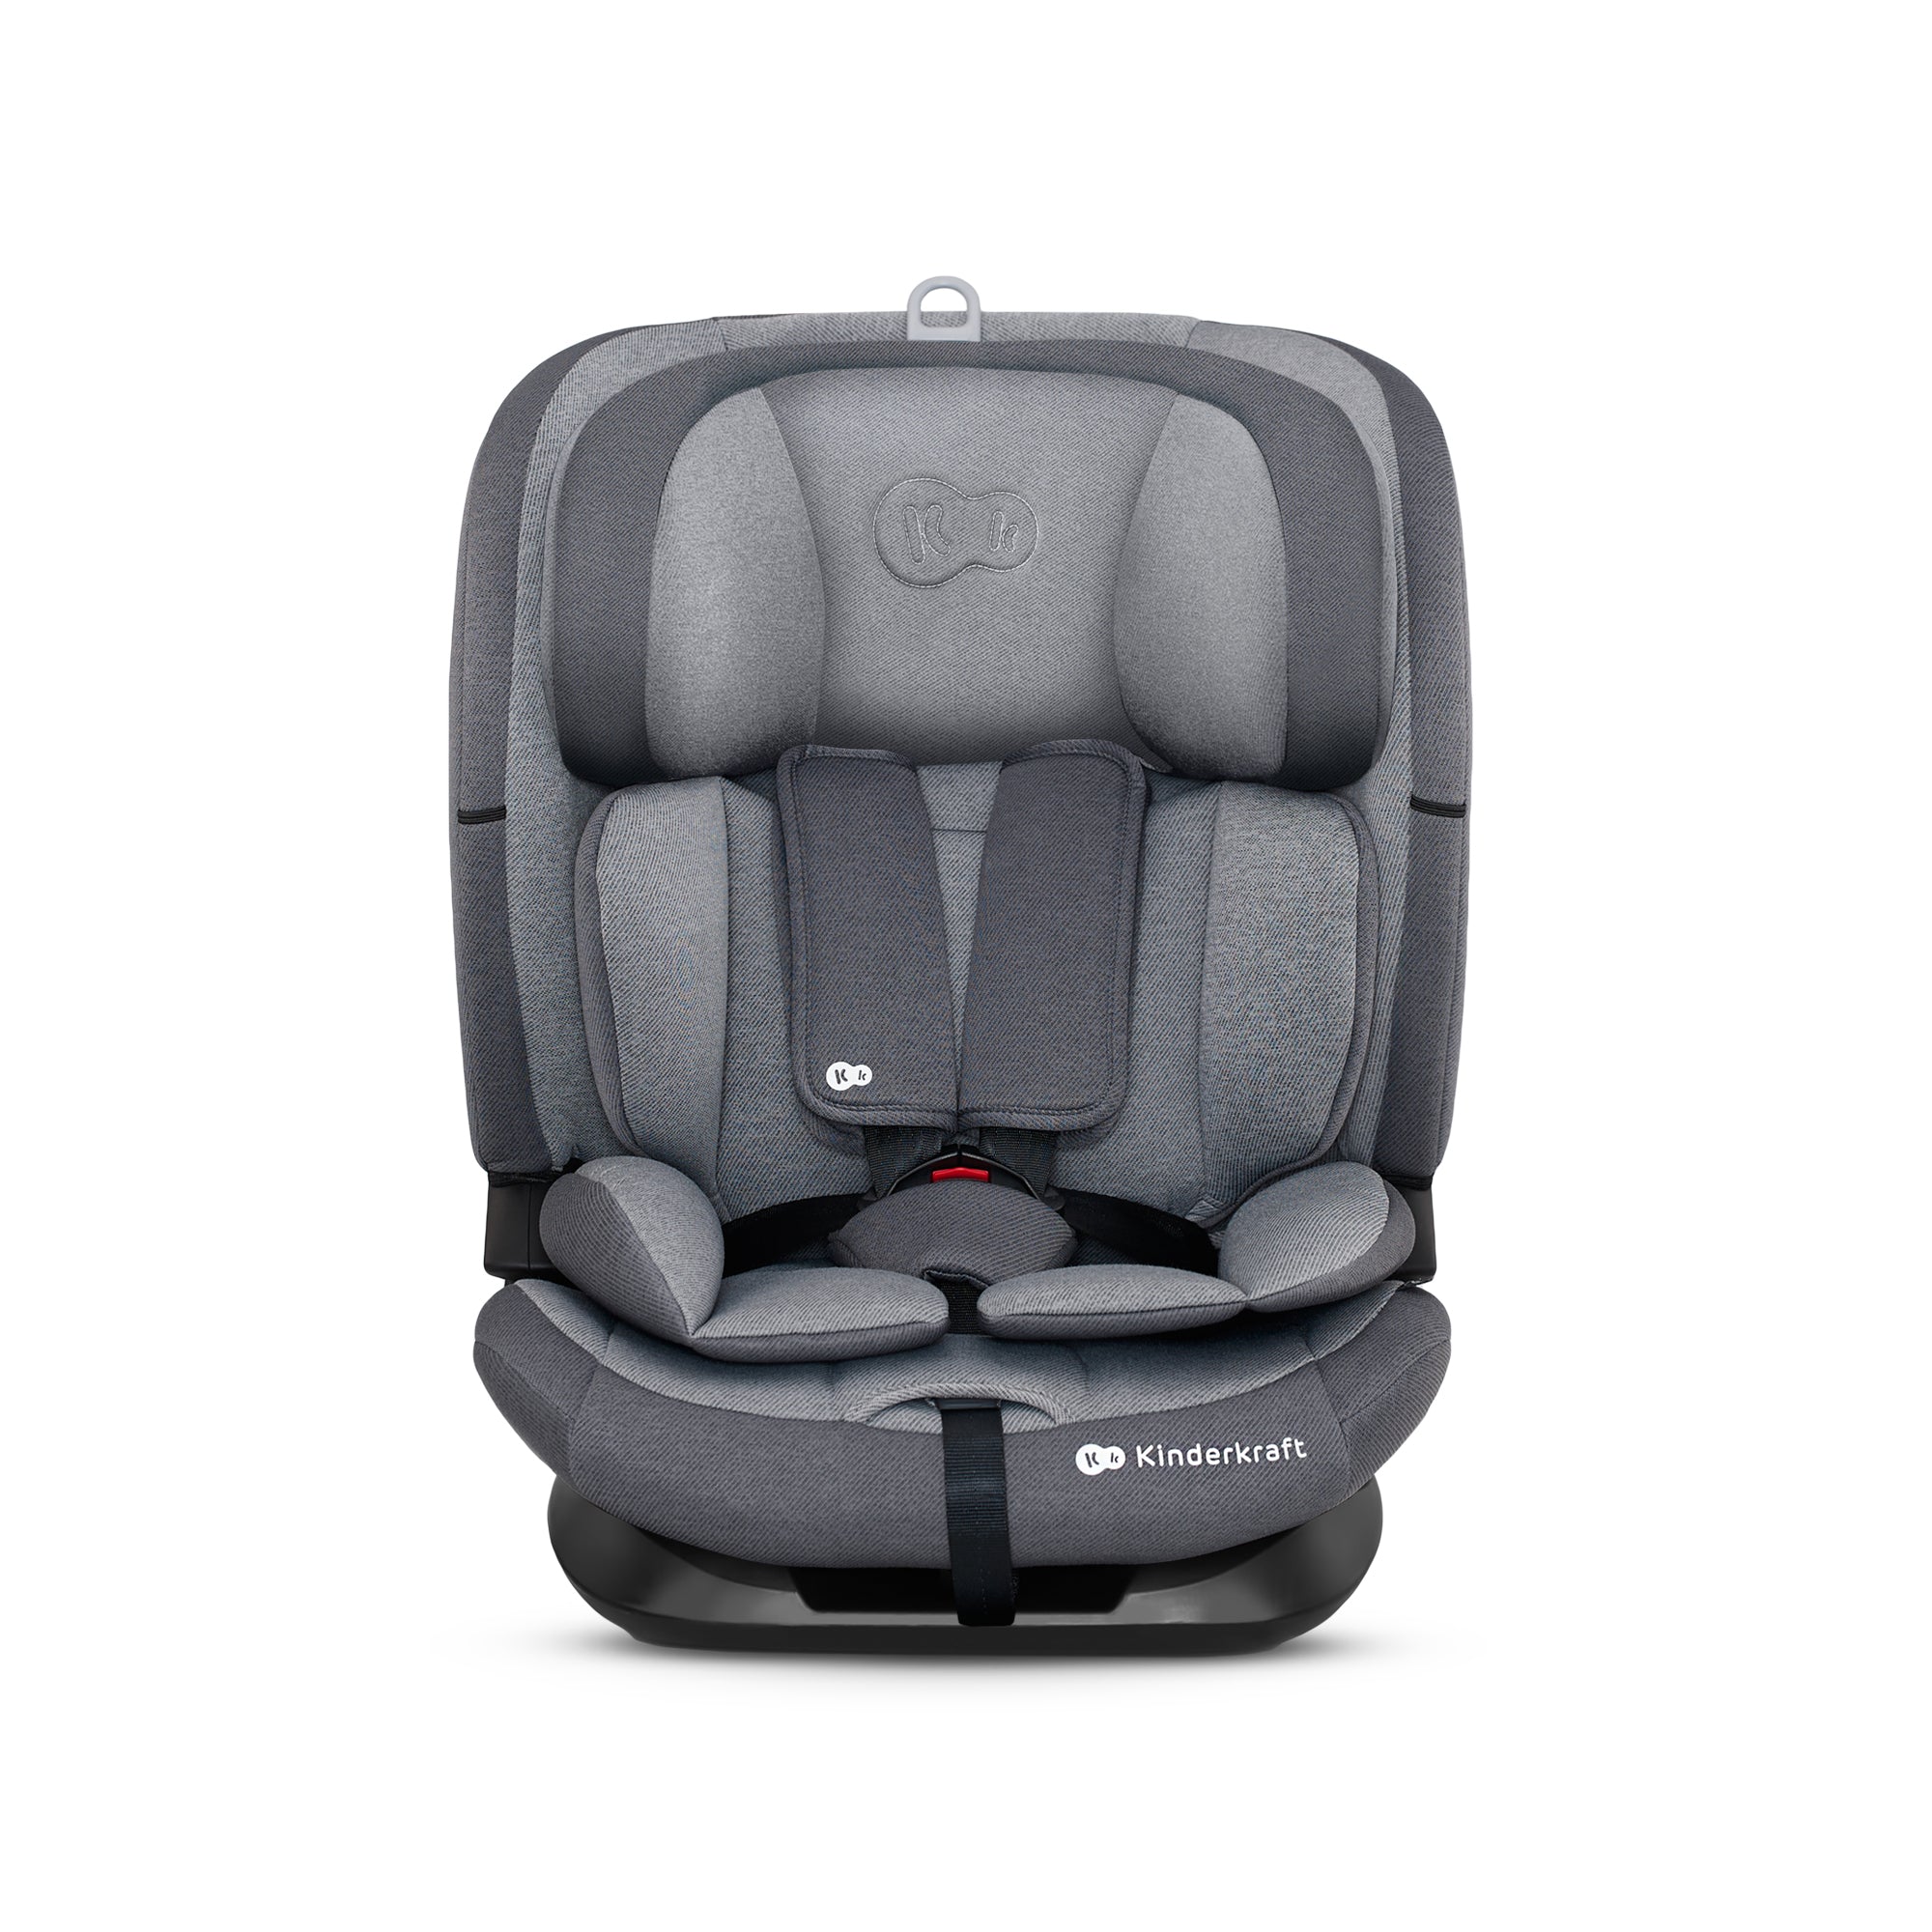 Kinderkraft - strollers, car seats, bikes for children and other